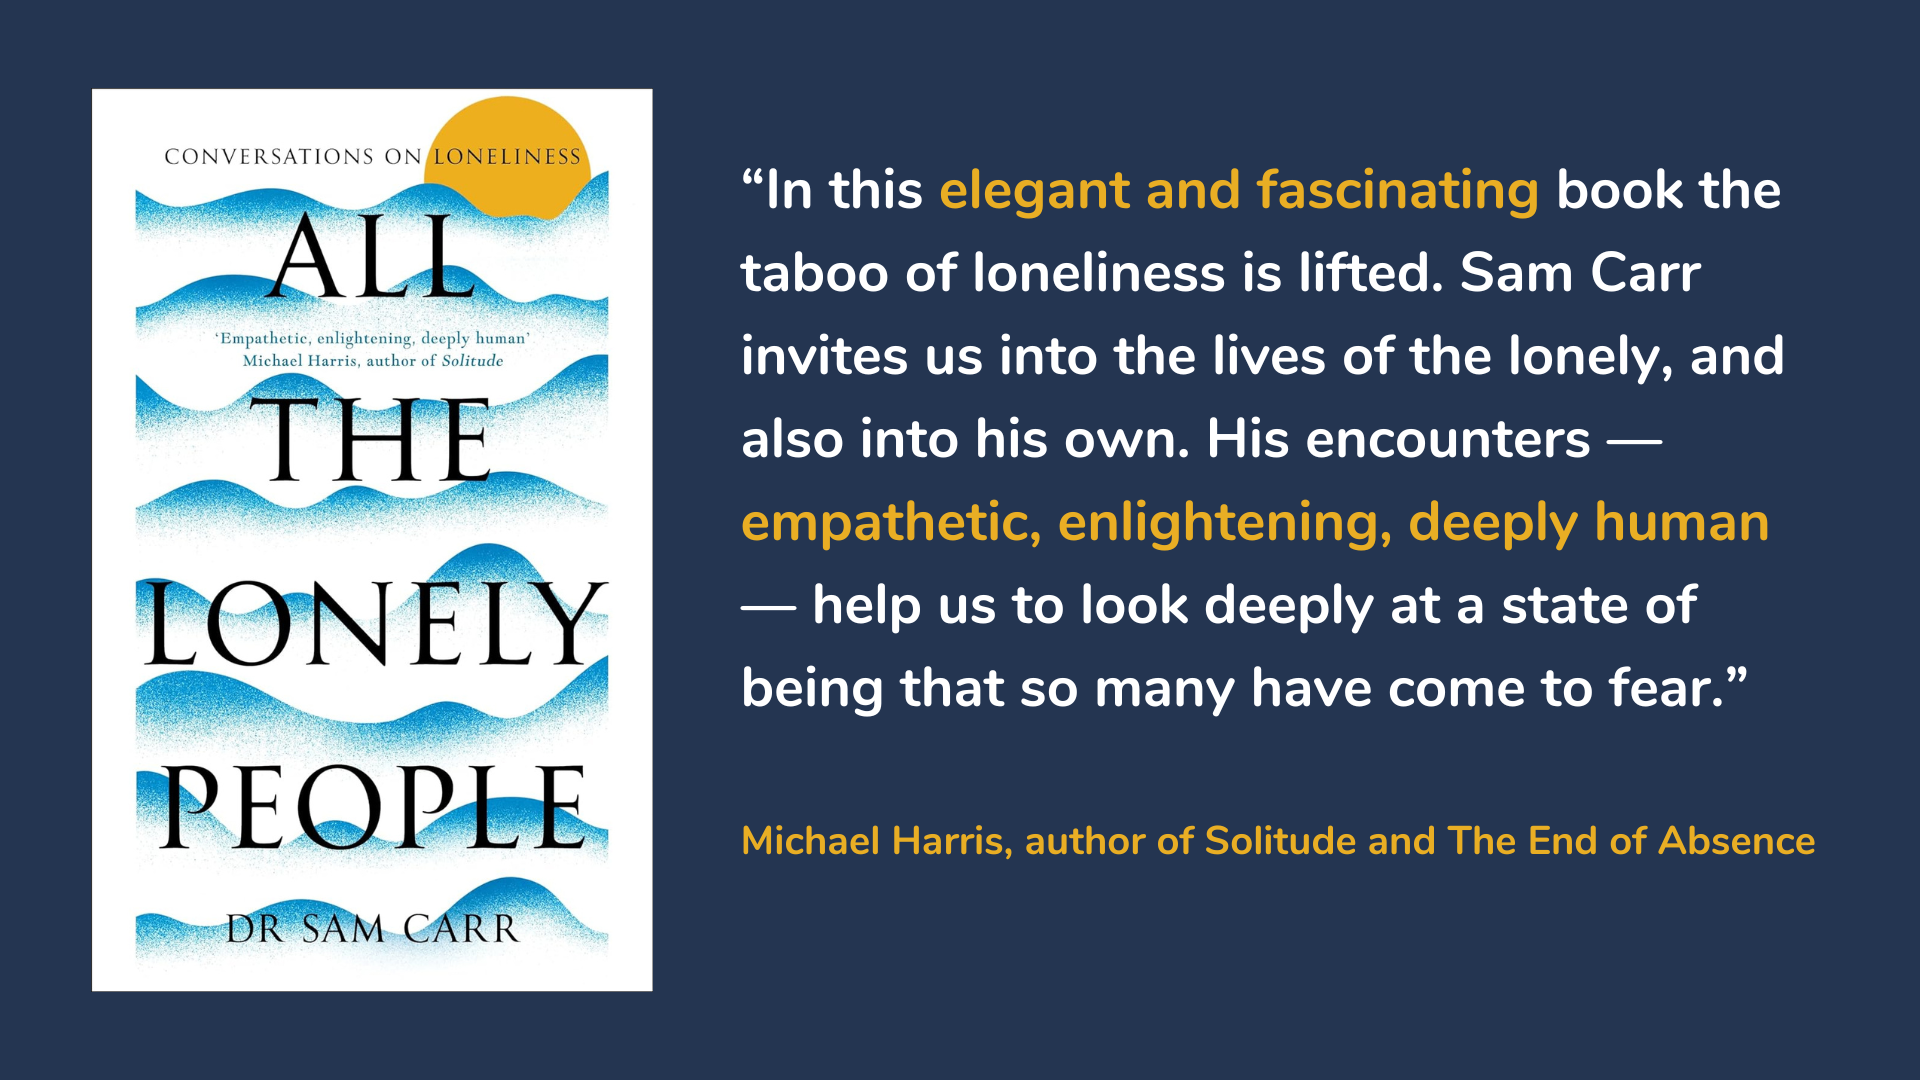 All the Lonely People: Conversations on Loneliness. Book cover and quote about the book.